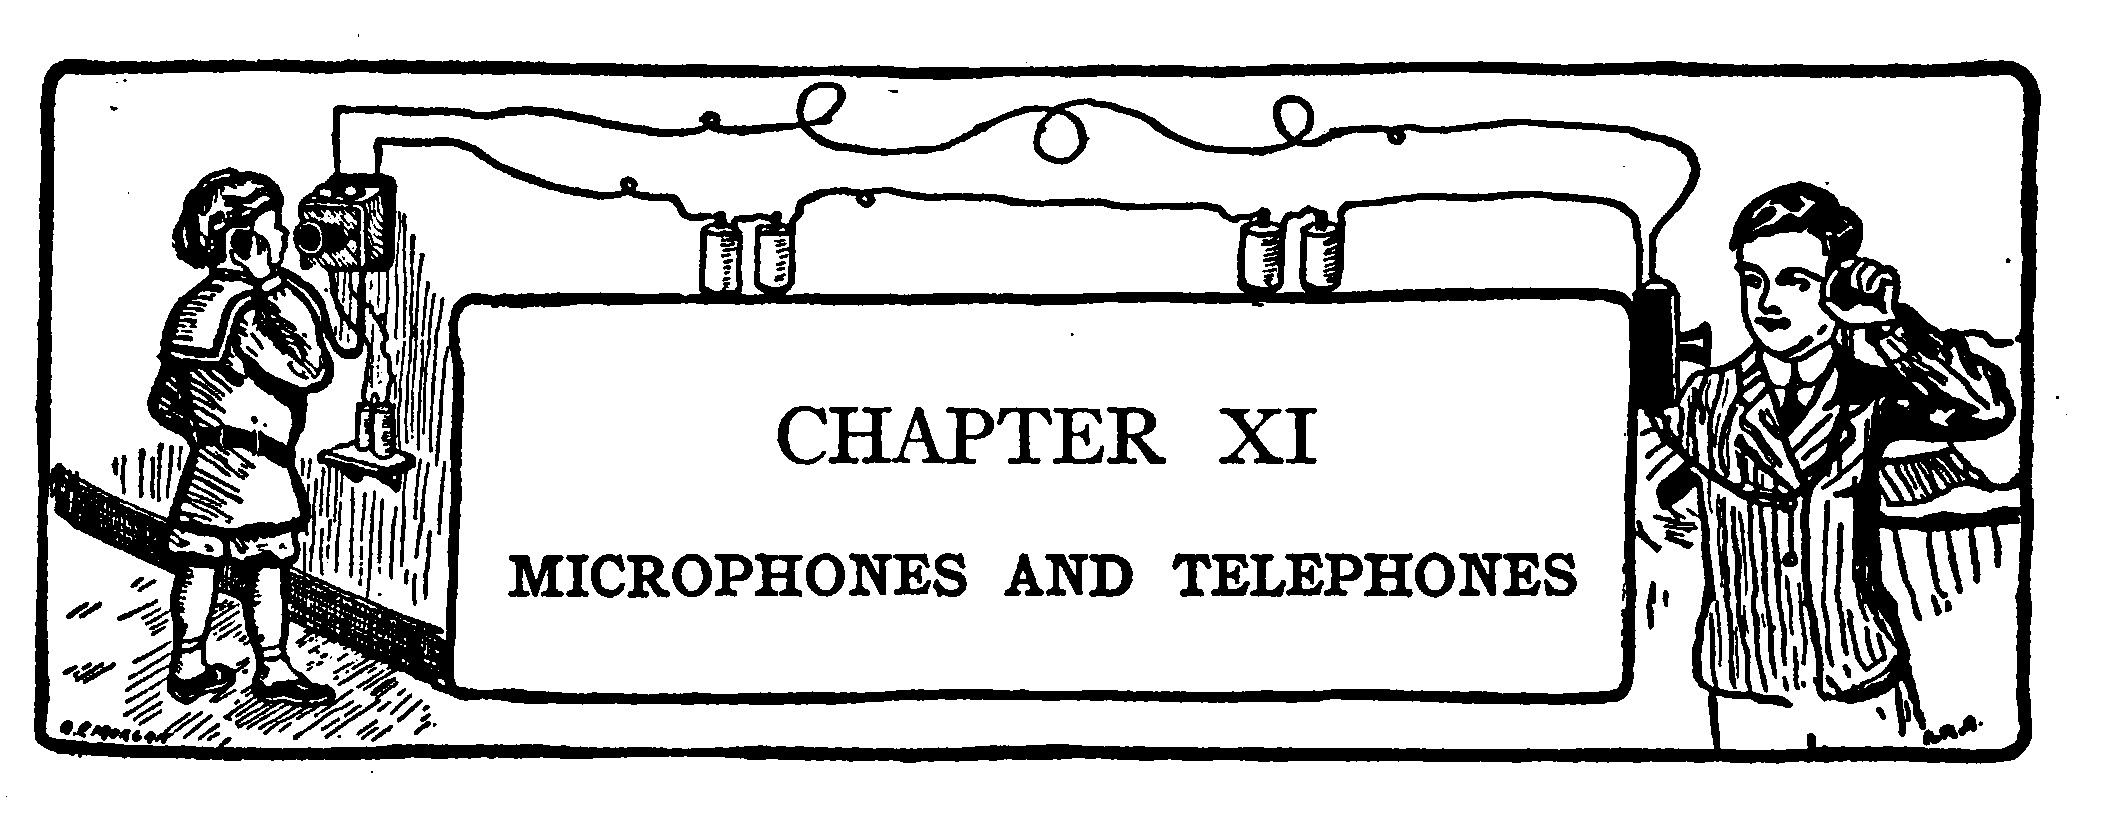 MICROPHONES AND TELEPHONES